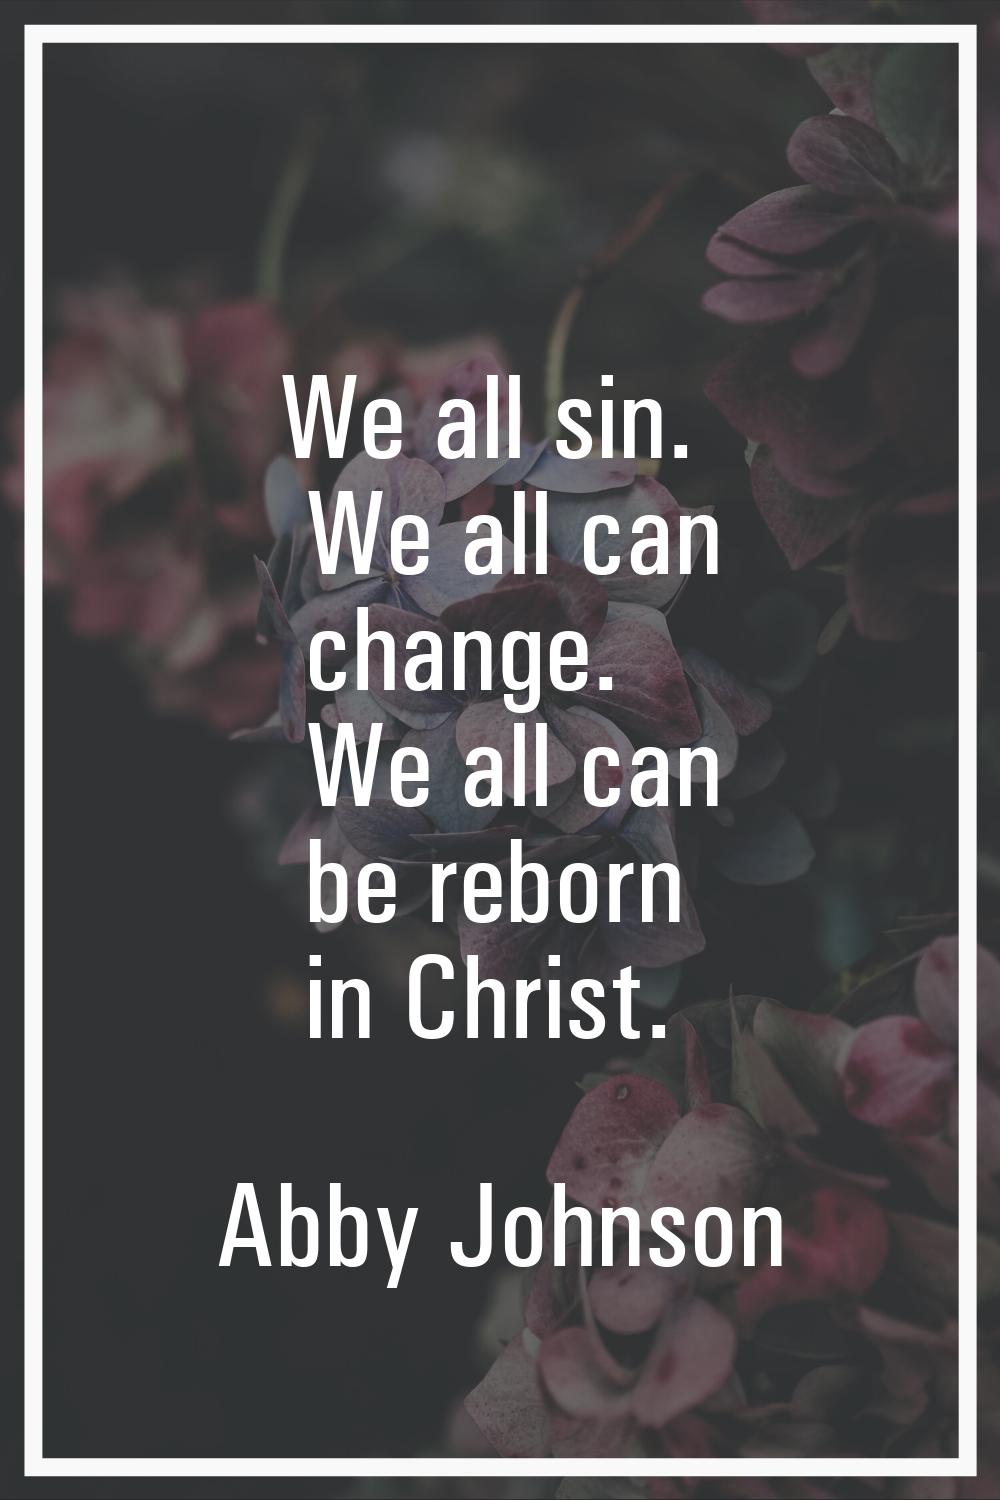 We all sin. We all can change. We all can be reborn in Christ.